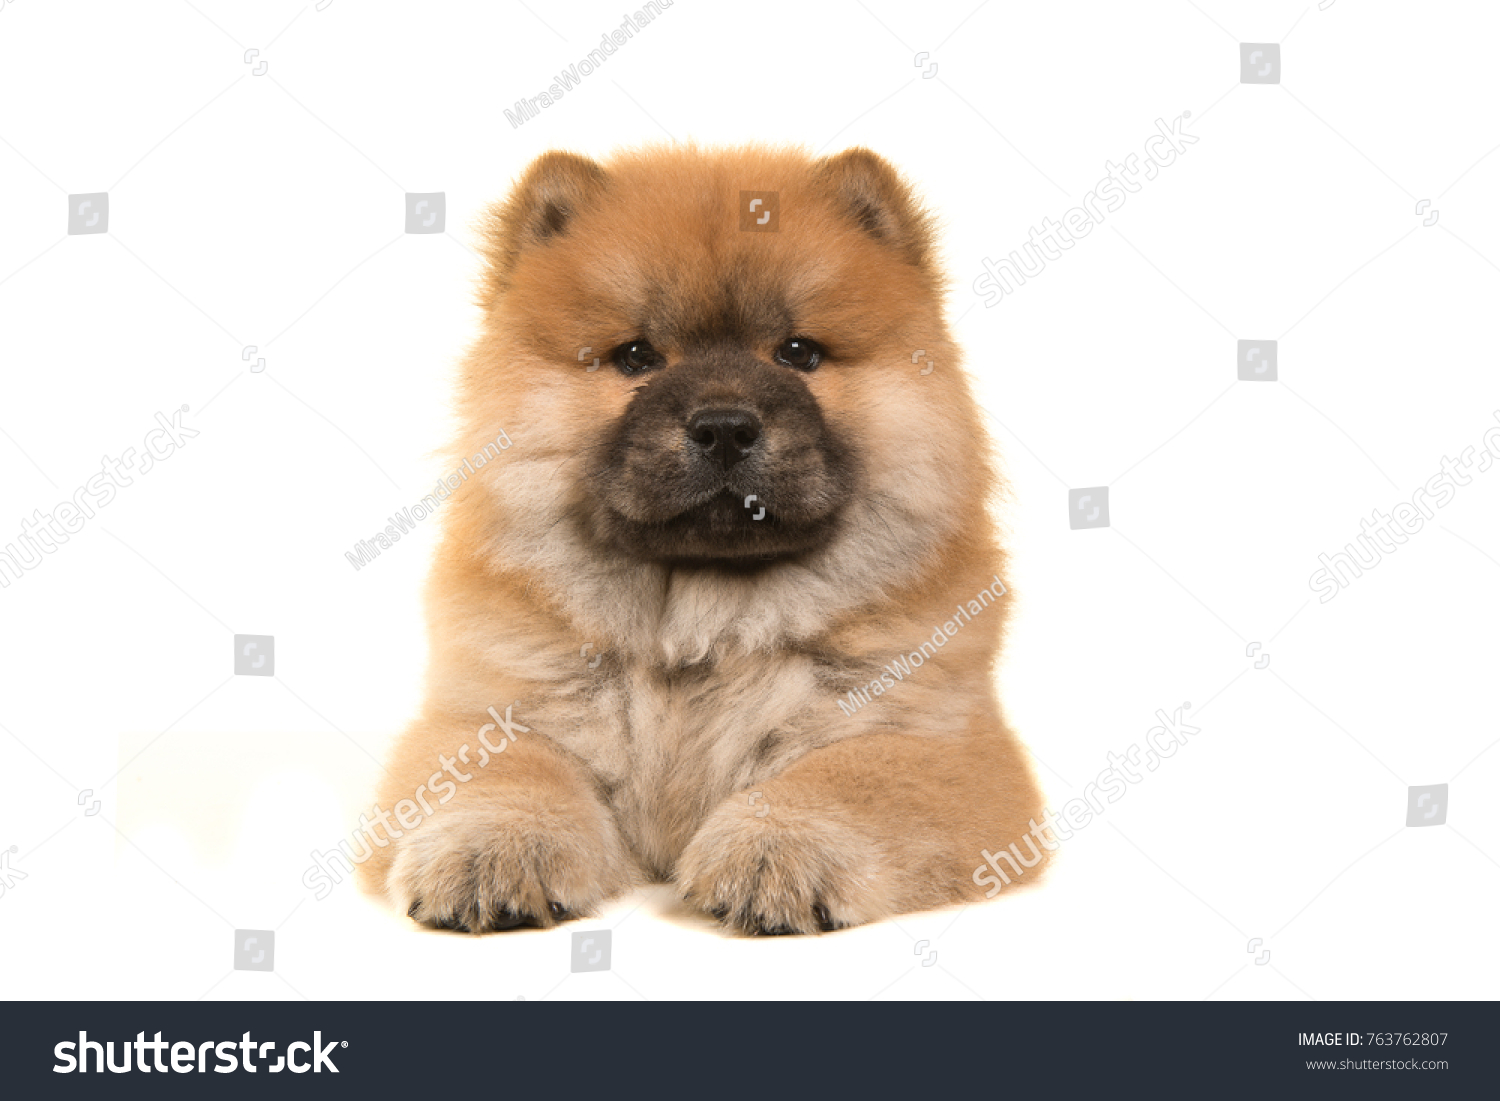 Chow chow puppy seen from the front lying down looking at the camera isolated on a white background #763762807